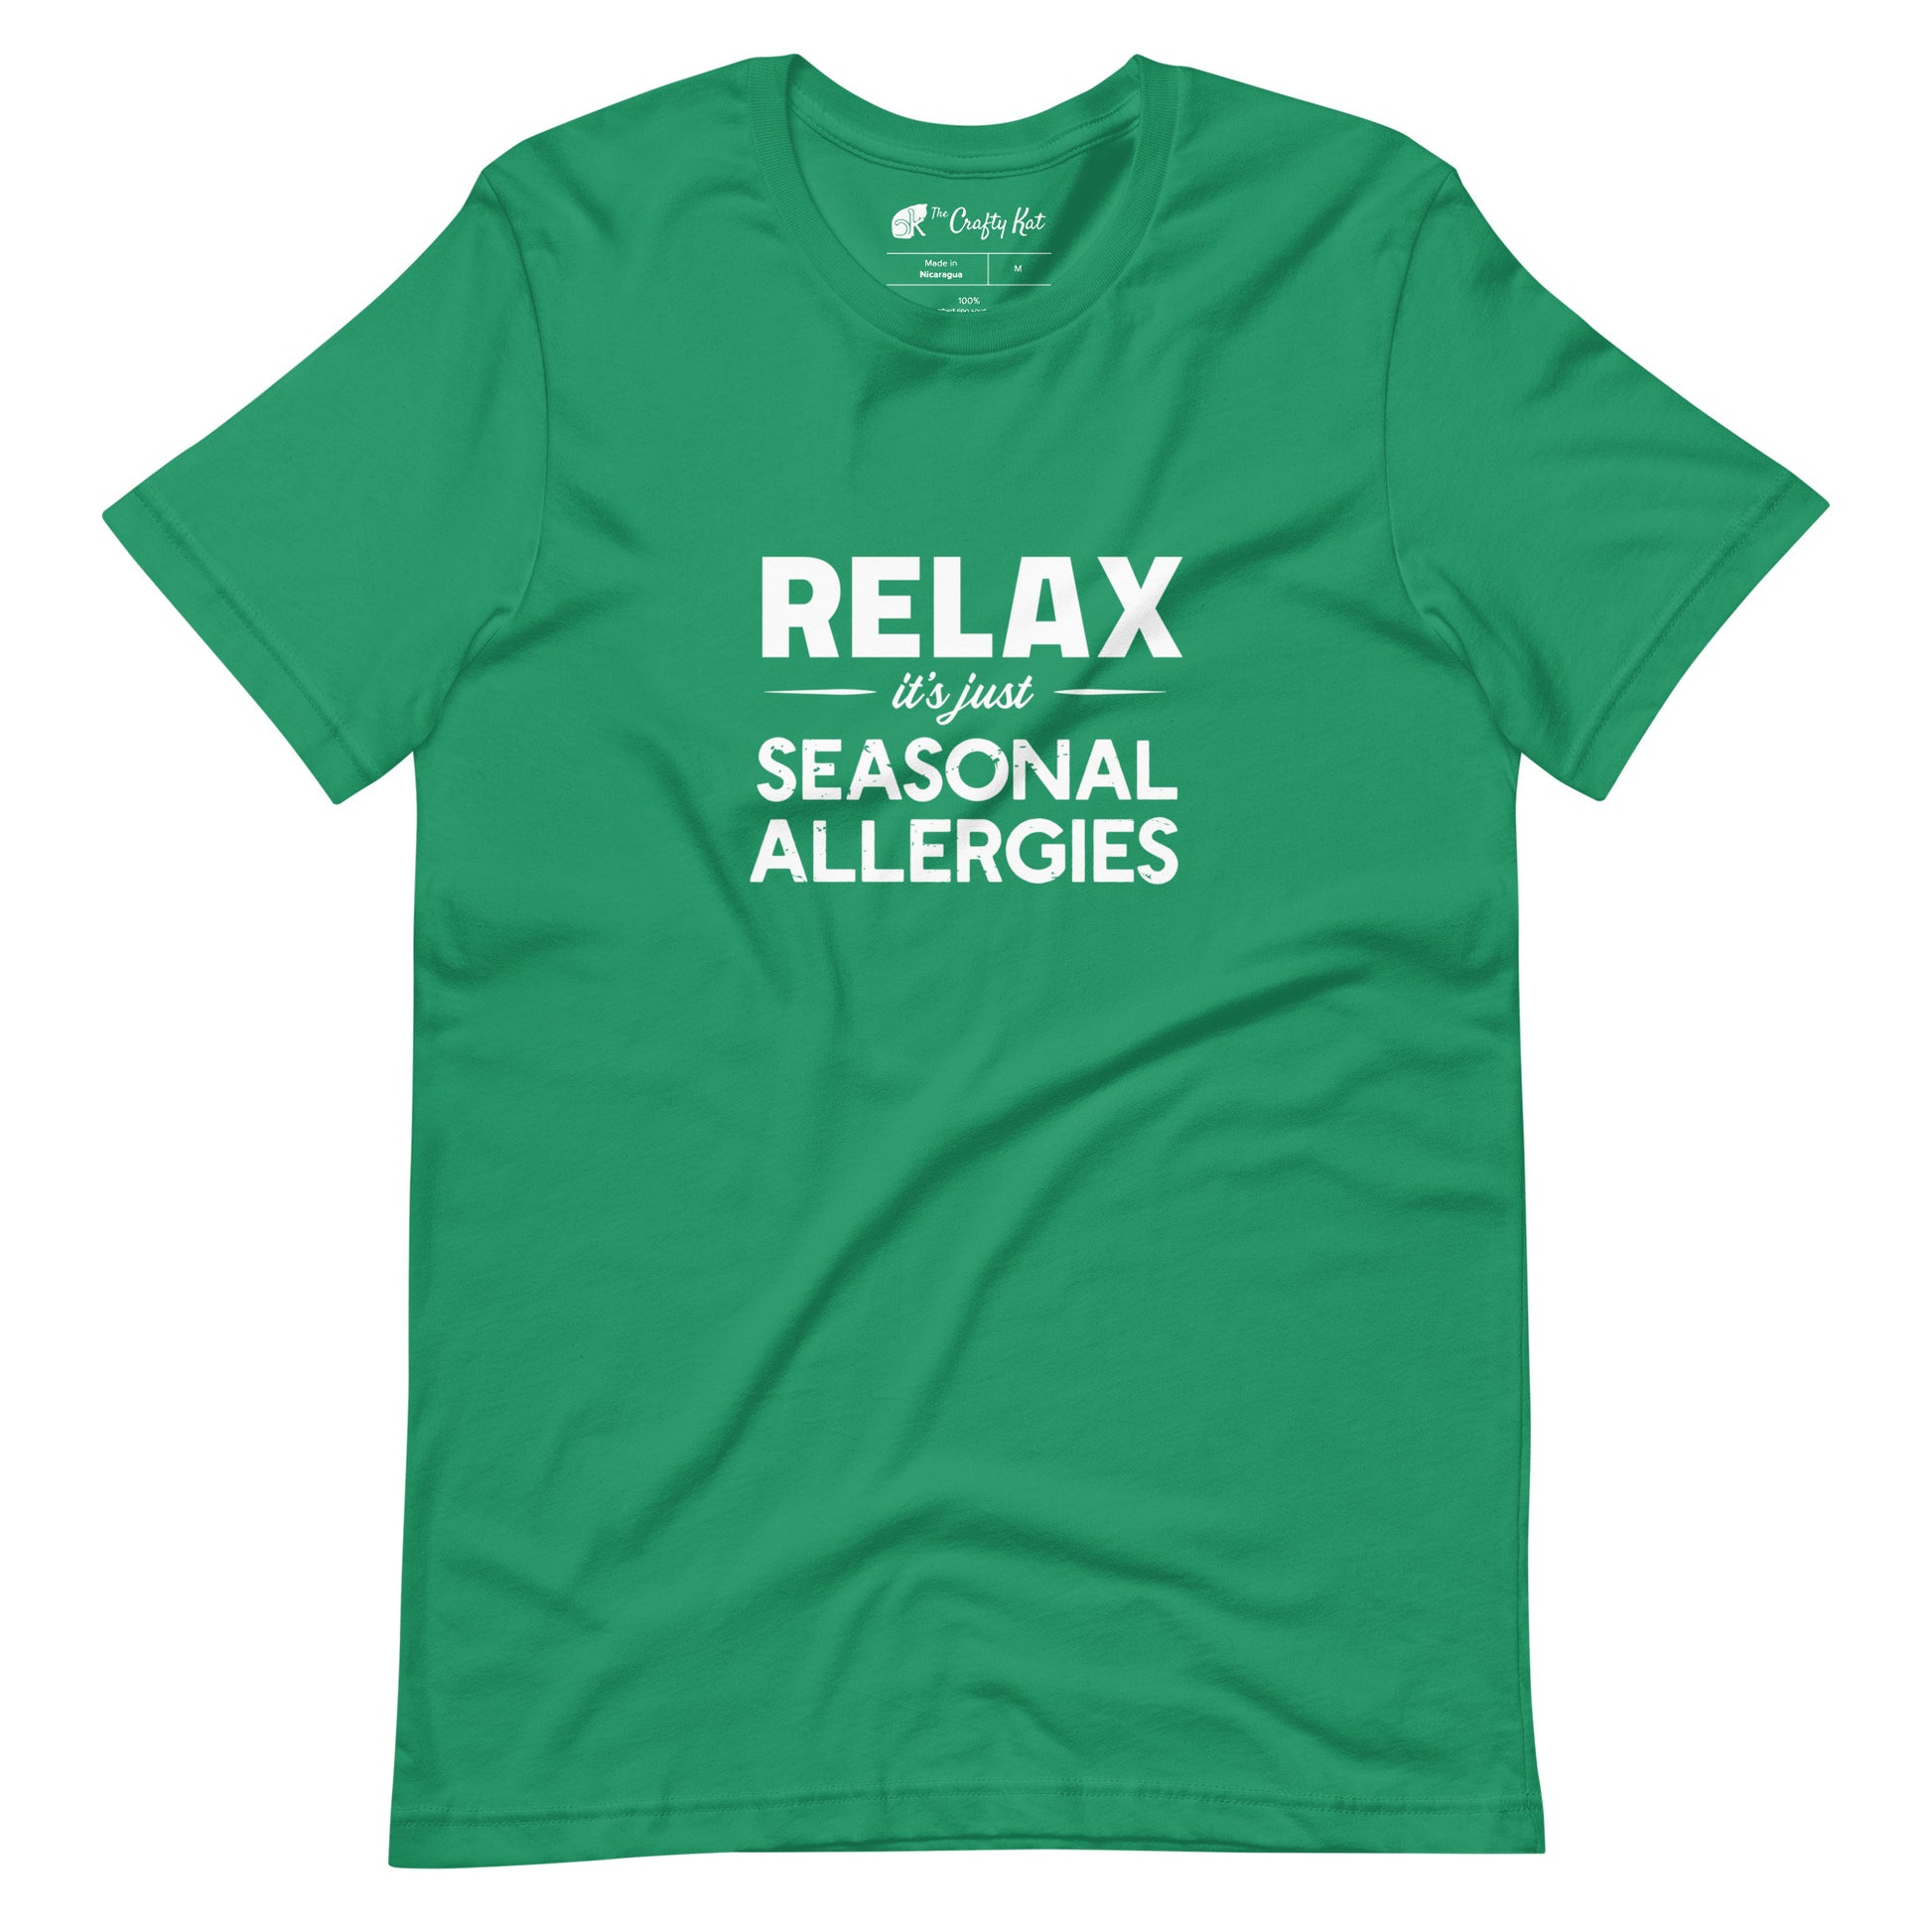 Kelly green t-shirt with white graphic: "RELAX it's just SEASONAL ALLERGIES"